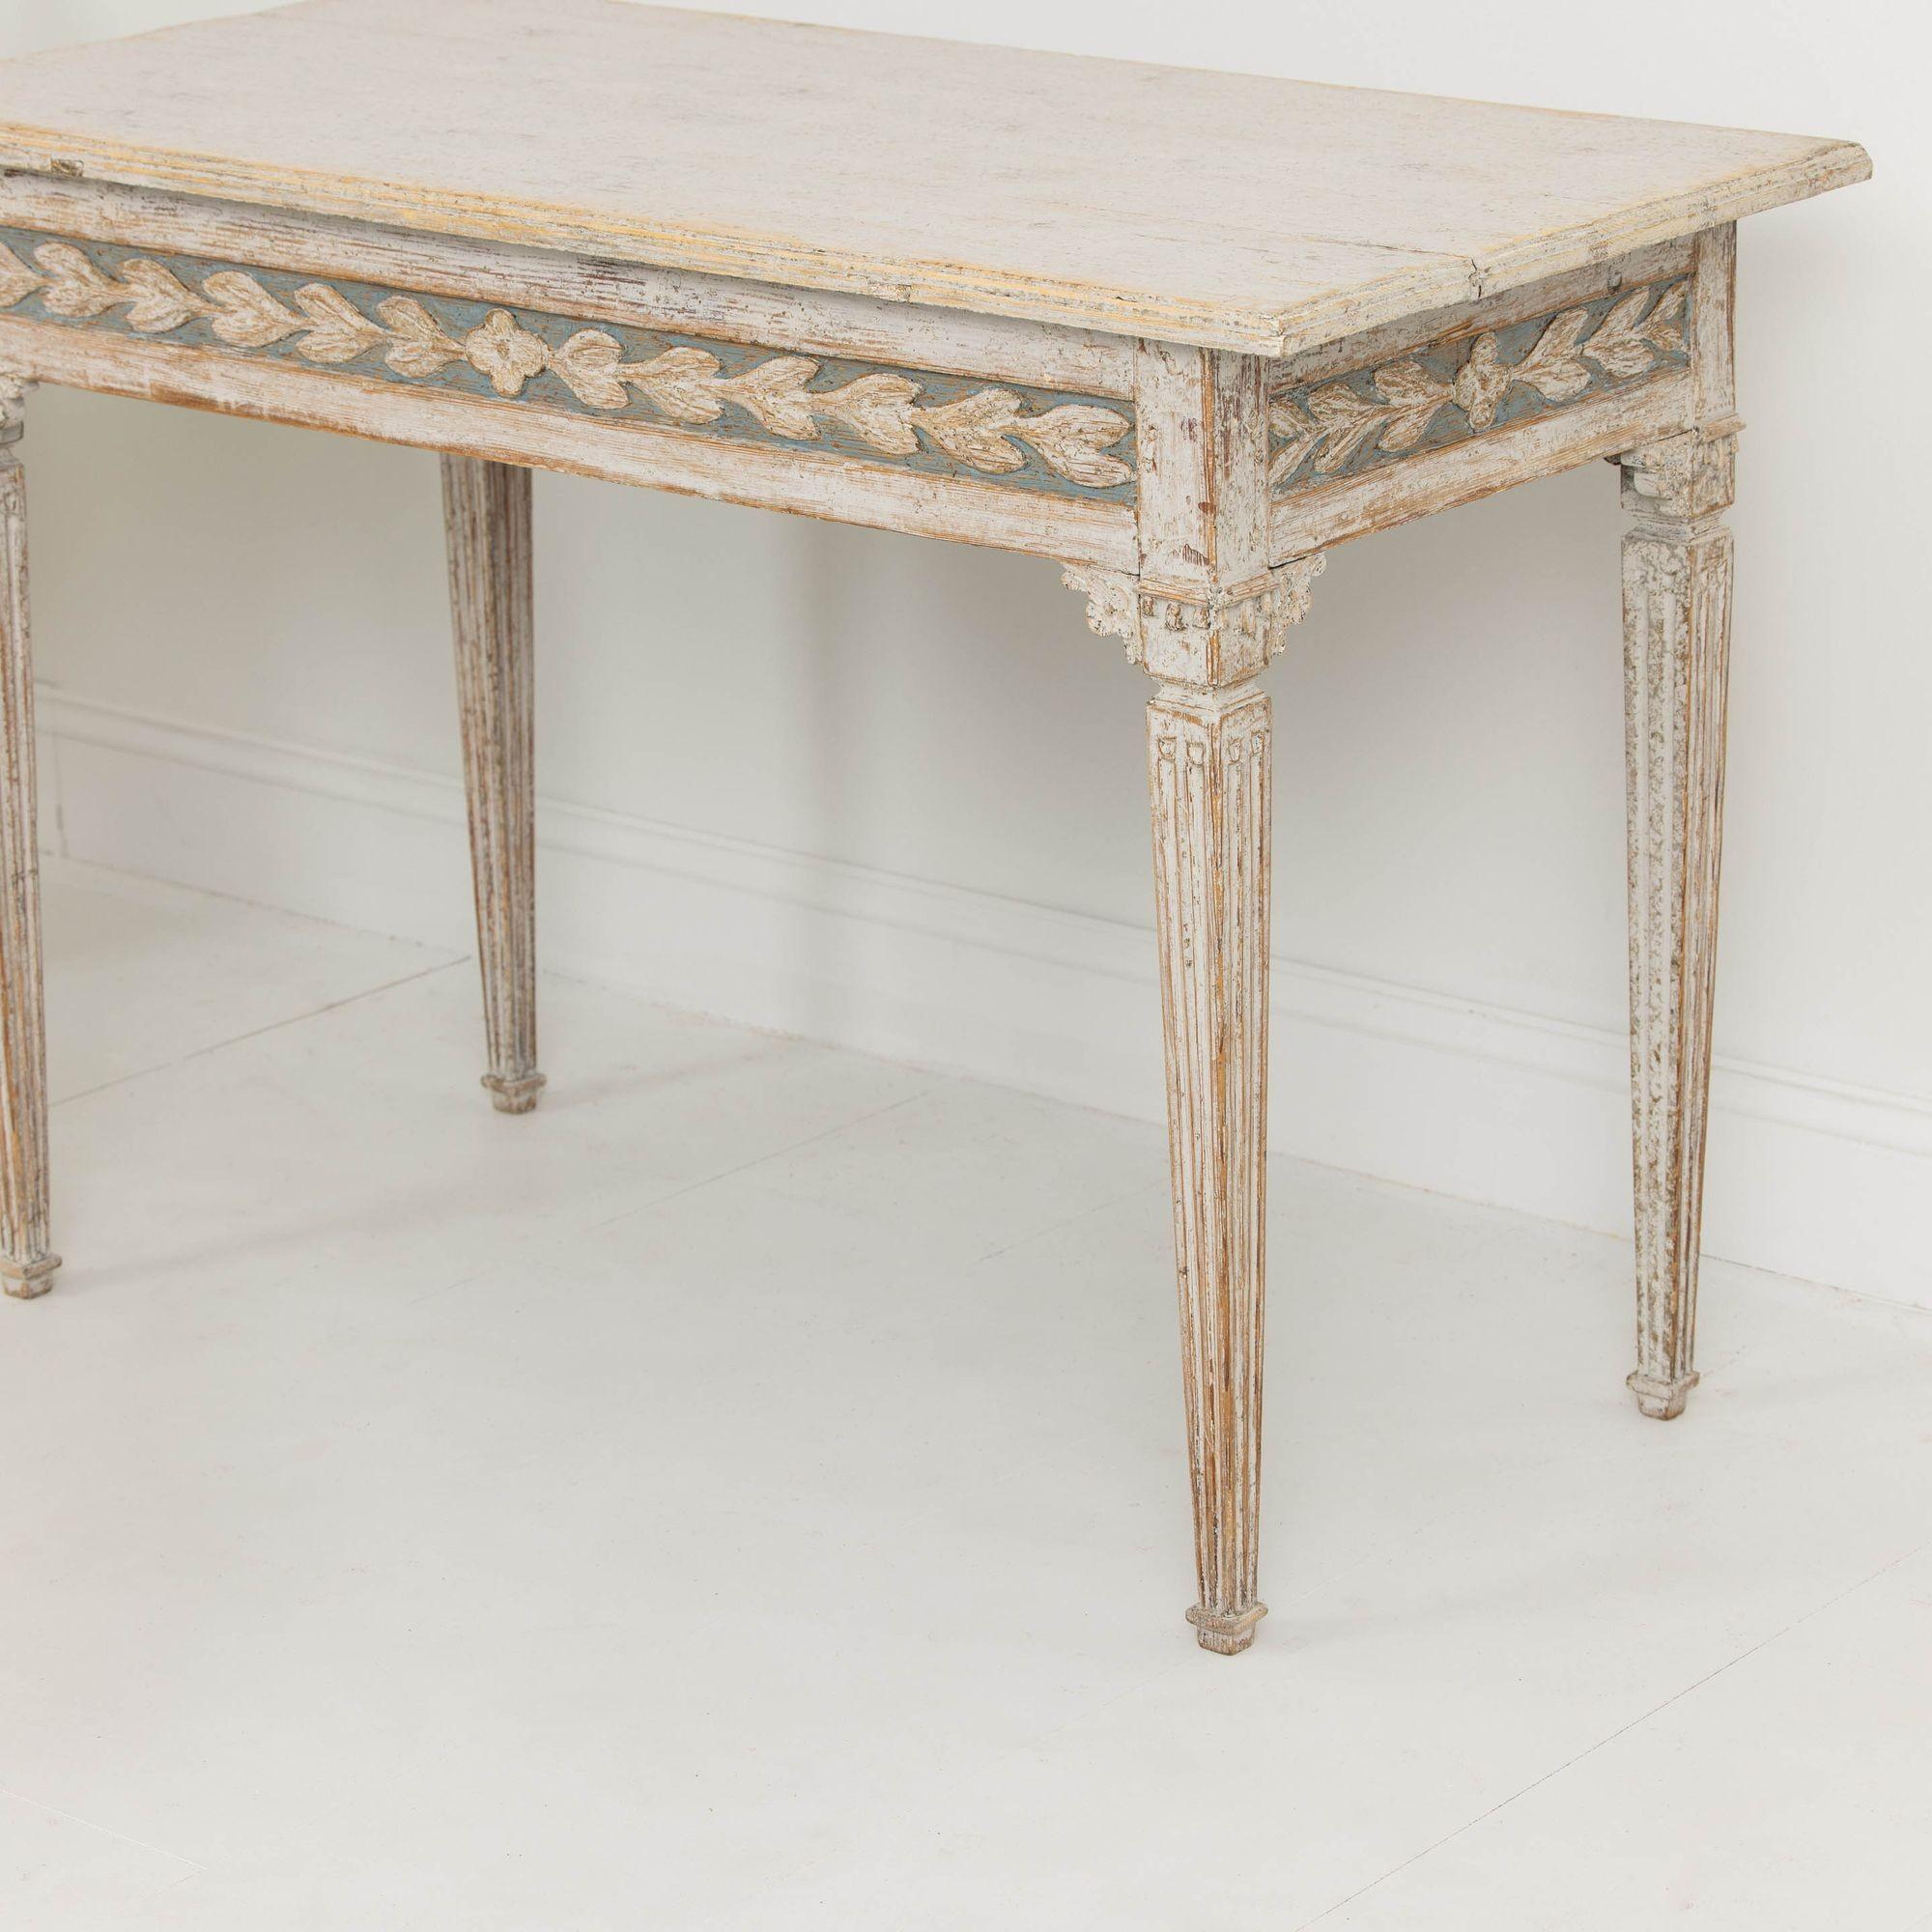 18th Century and Earlier 18th c. Swedish Gustavian Period Painted Console Table